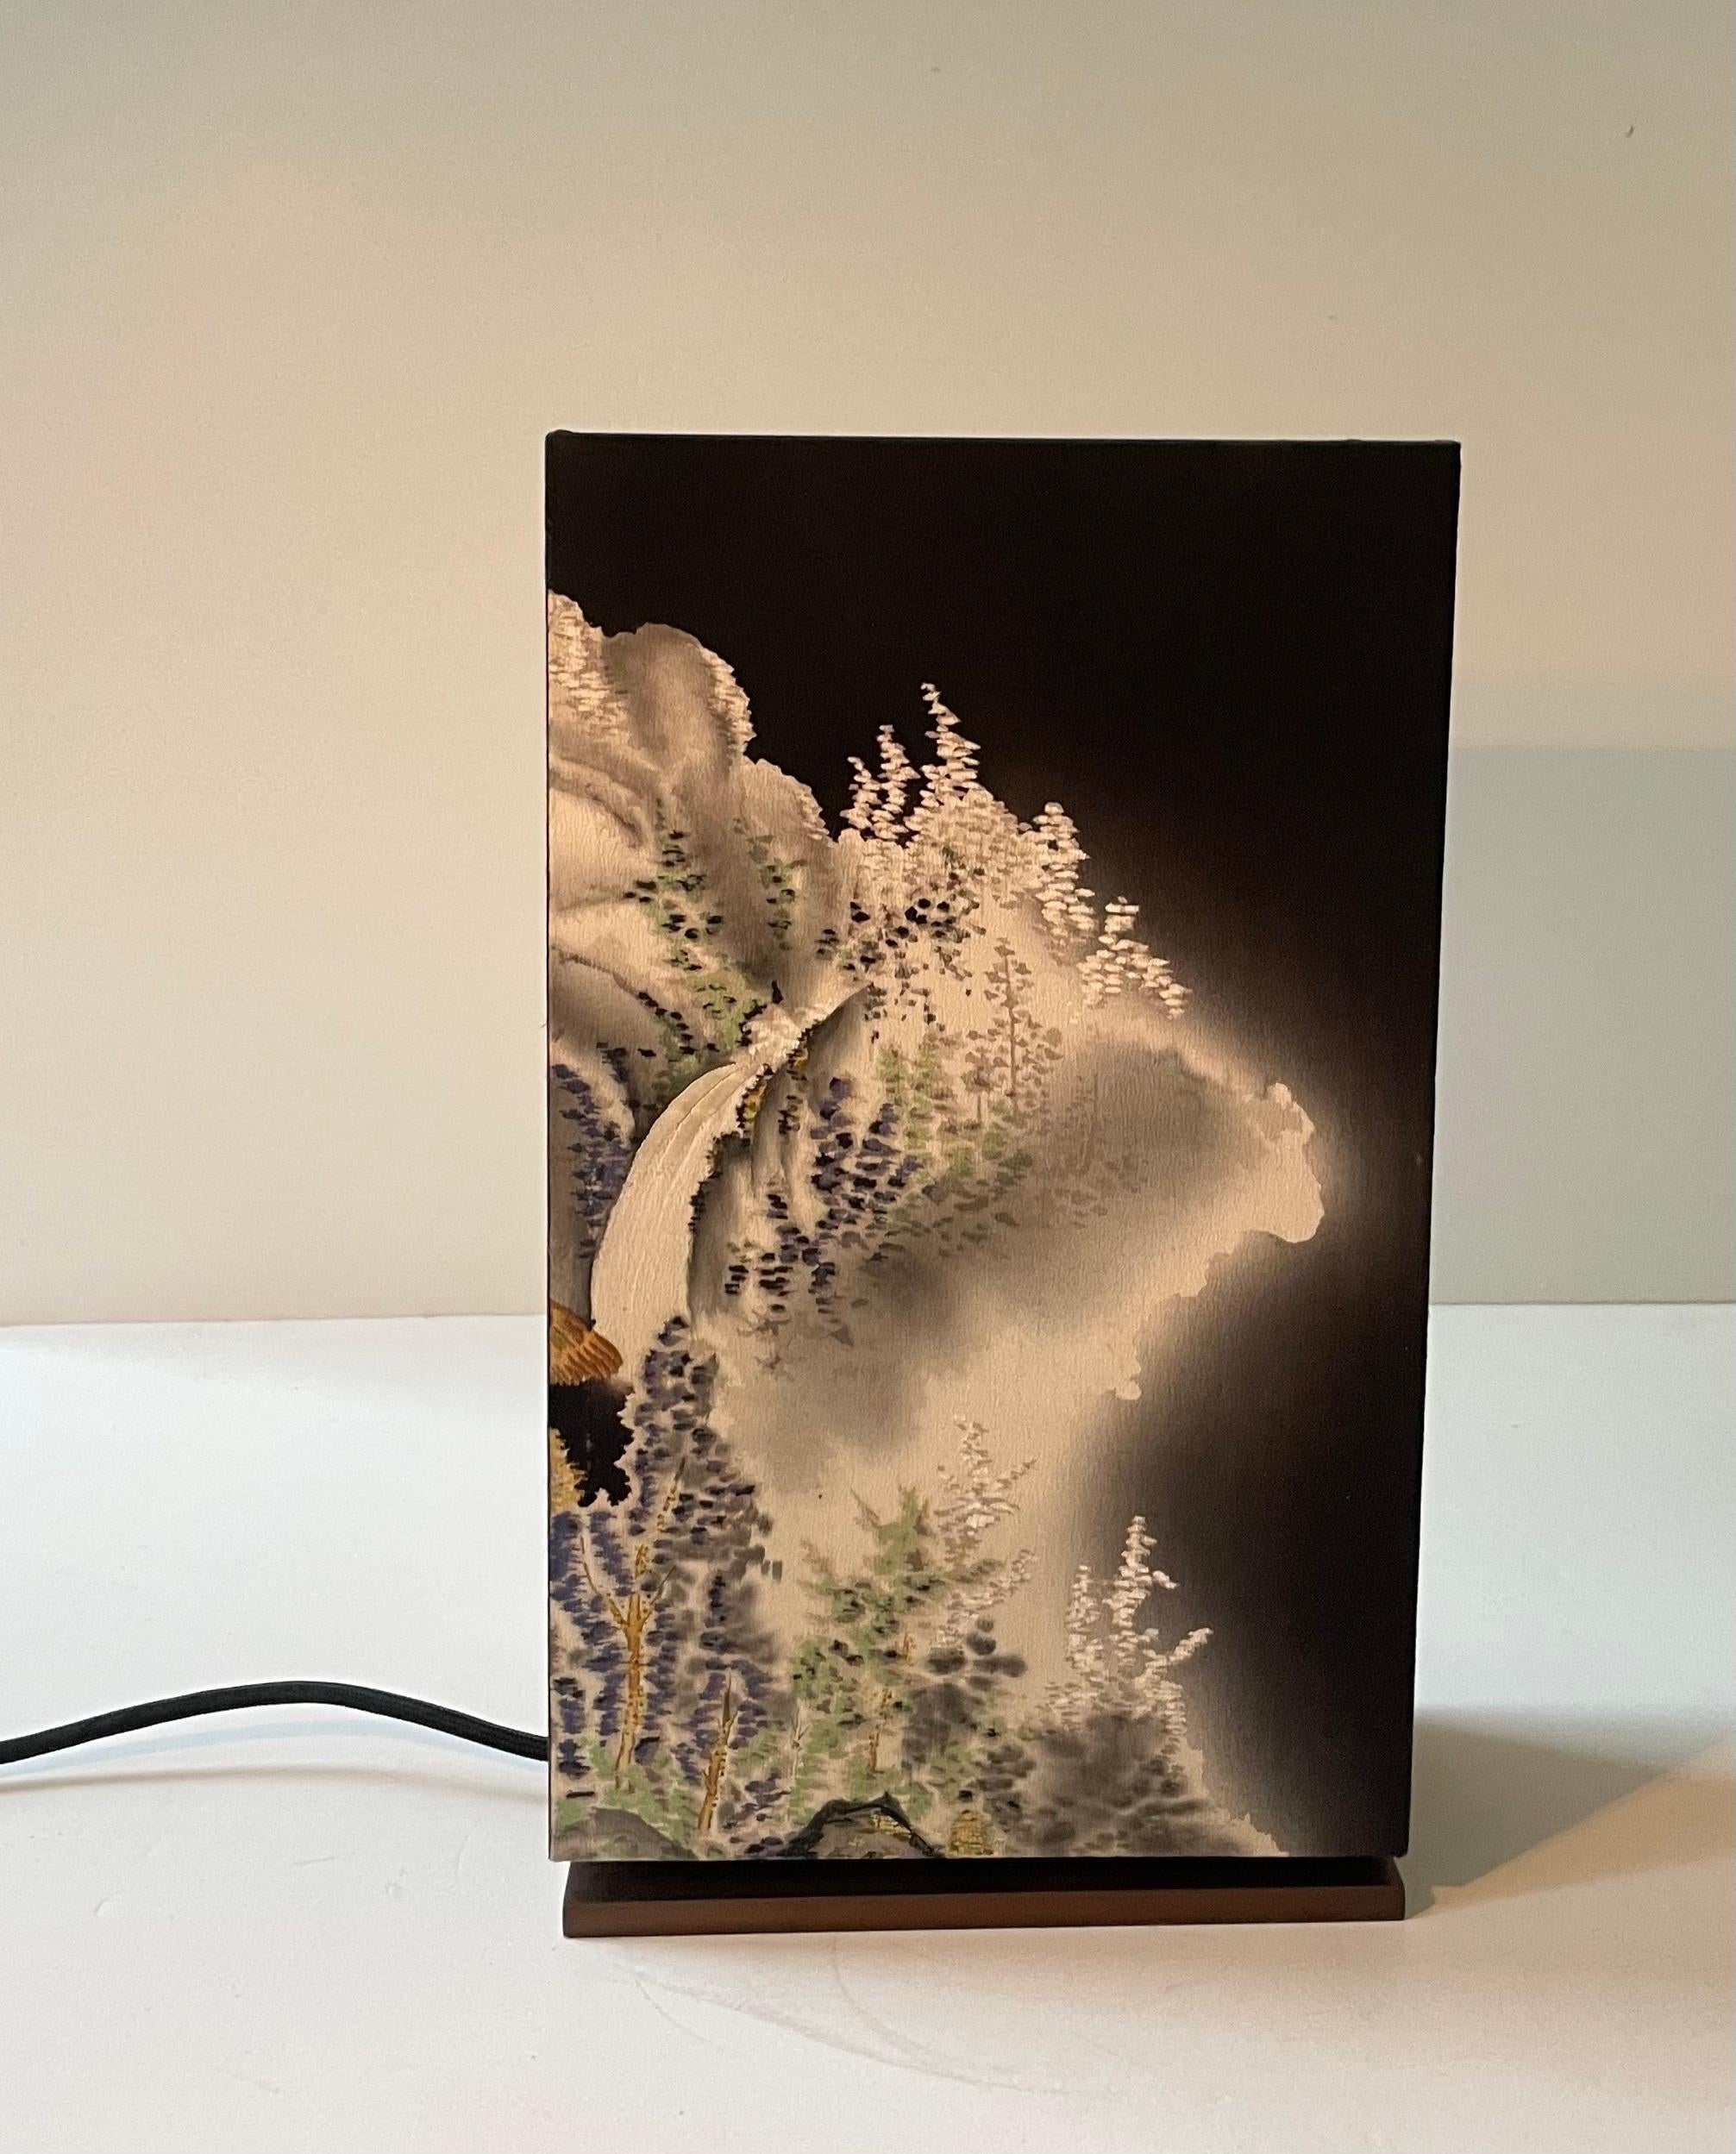 This is one of several Light Objects created by Geroma Löw x Atelier Livia
- each Object is unique.

The shades of these lamps are handmade from a silk lining of an antique HAORI ( men's Kimono around 1850 ) laminated onto a specially manufactured